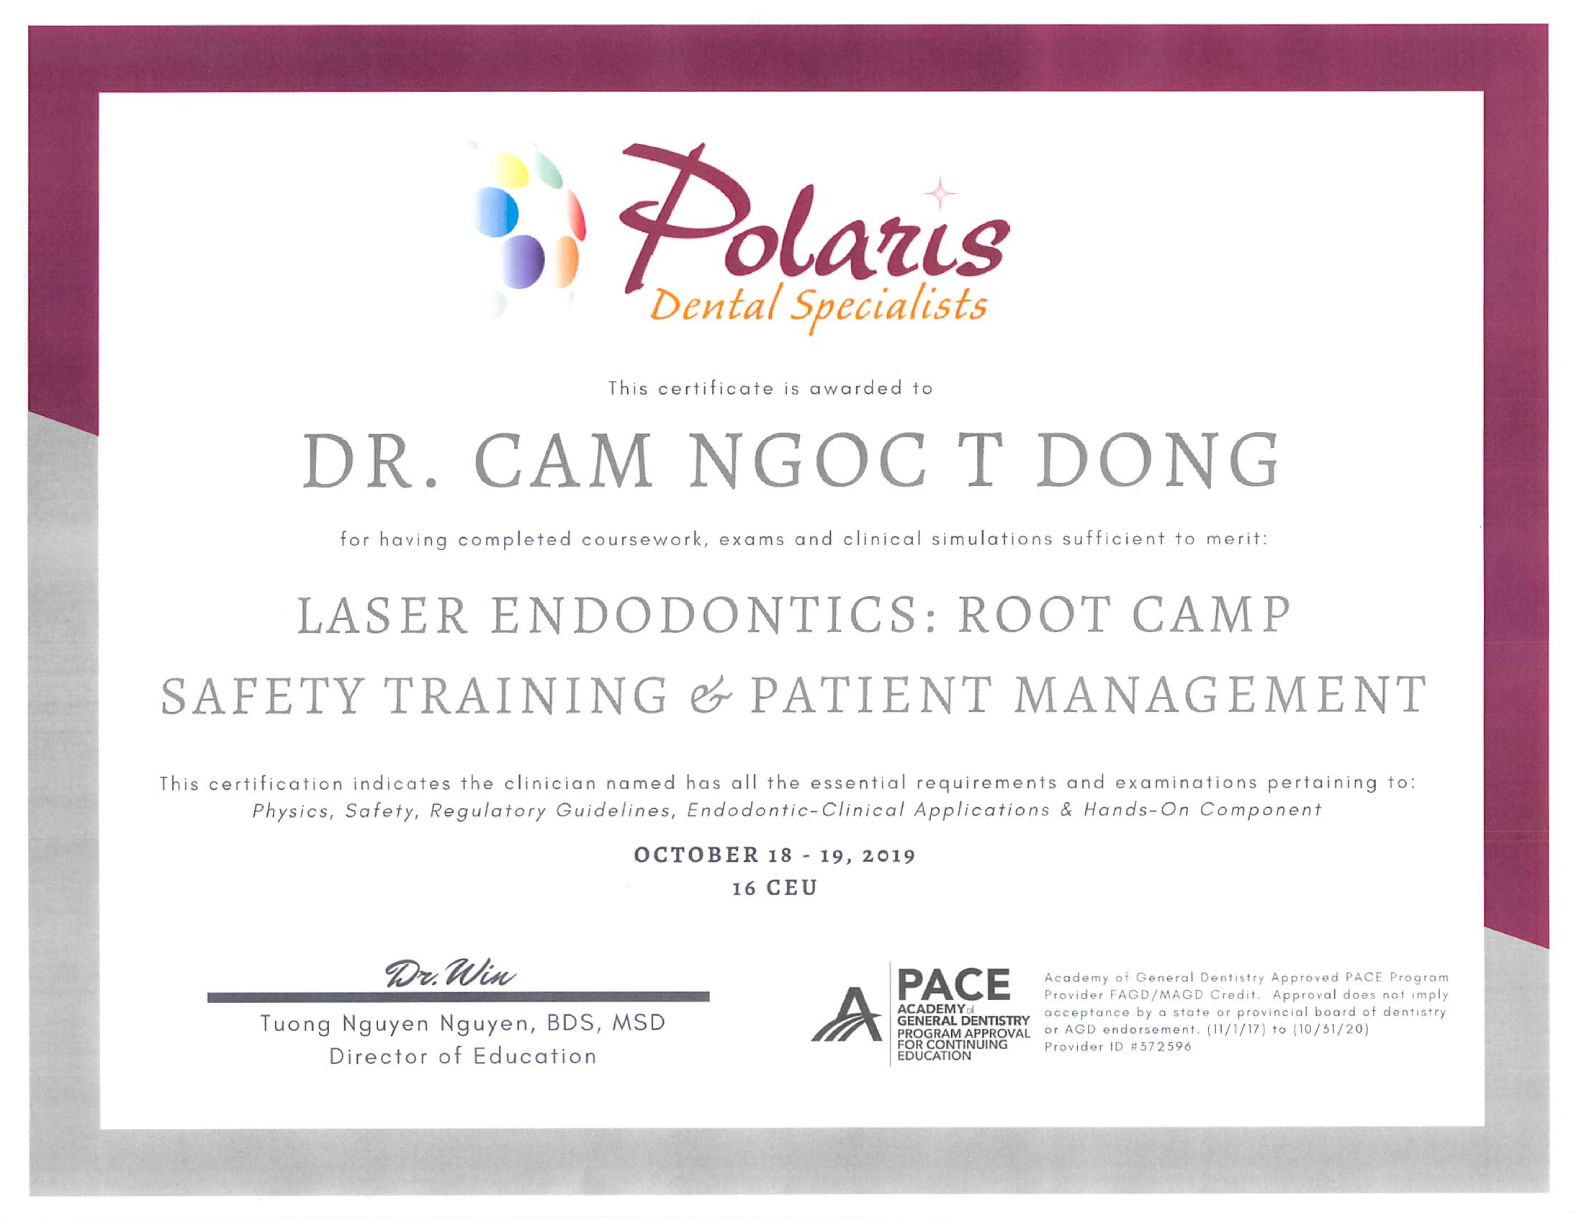 Polaris Laser Edno Root Camp safety and pt management